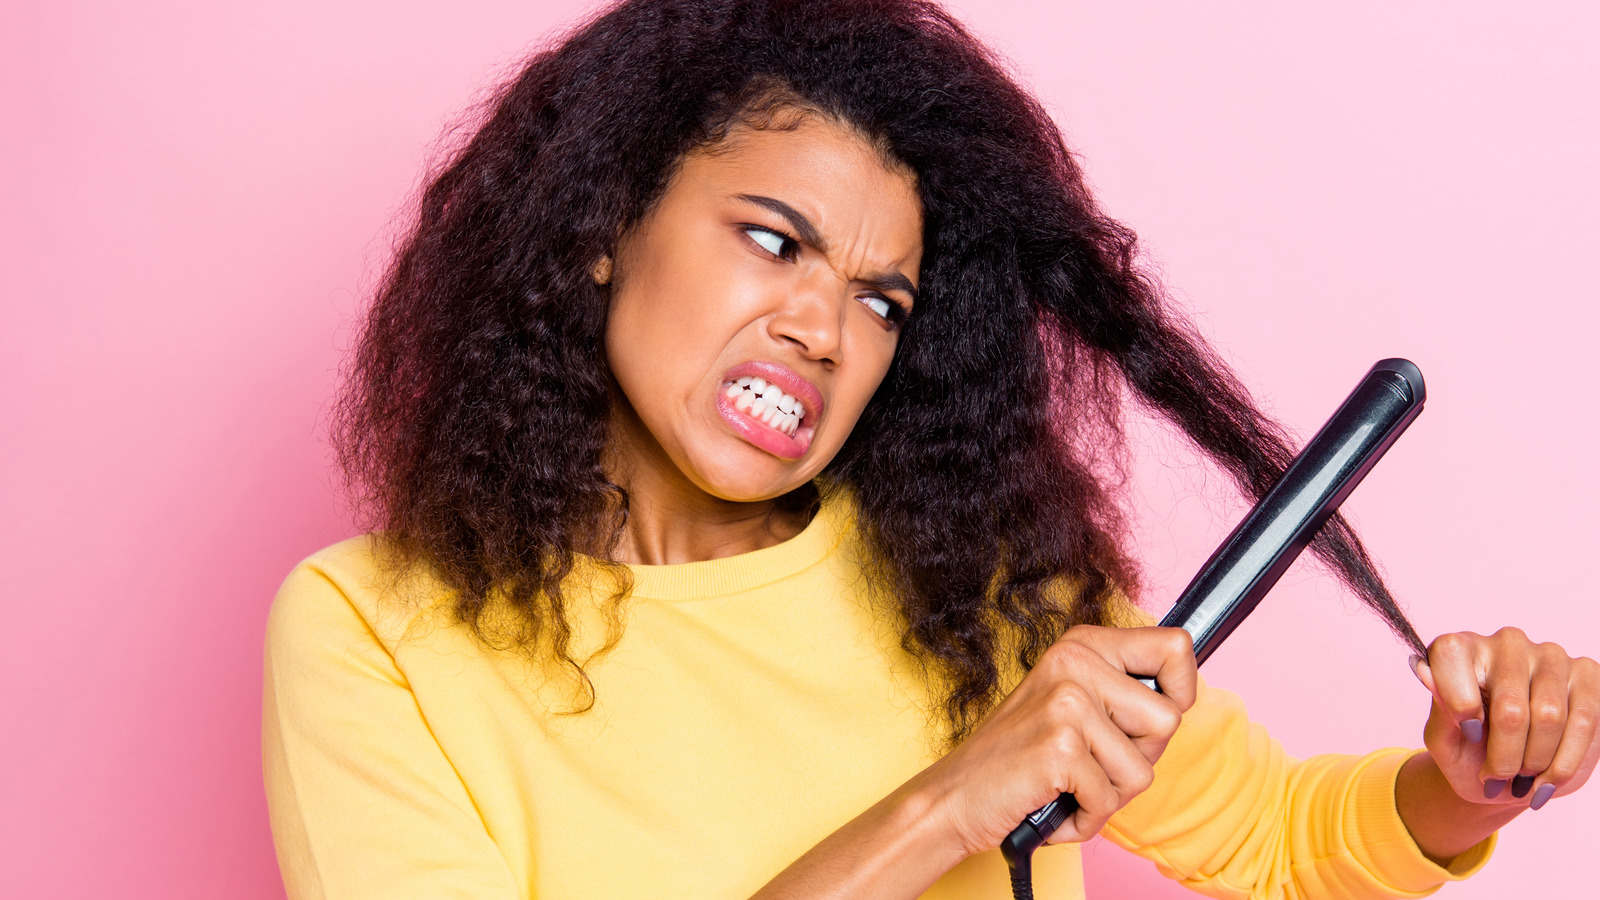 Finding The Right Flat Iron For Your Hair Type Just Got Easier